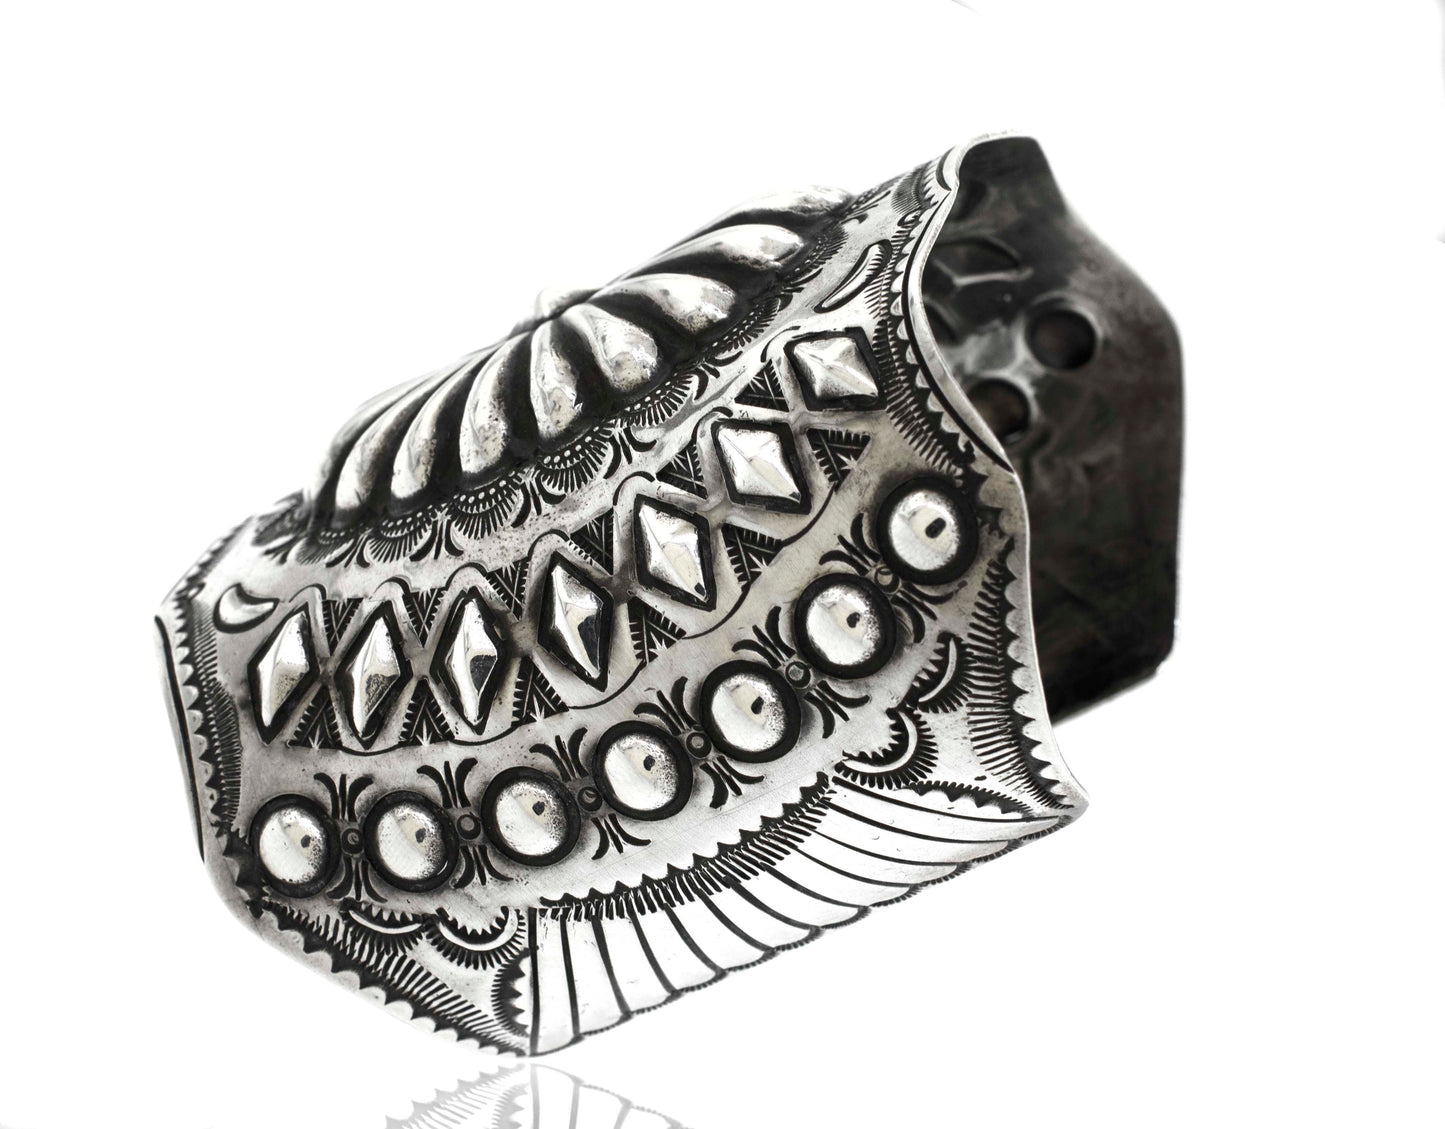 A Handcrafted Silver Concho Cuff featuring intricate engraved patterns and detailing, displayed on a white background.